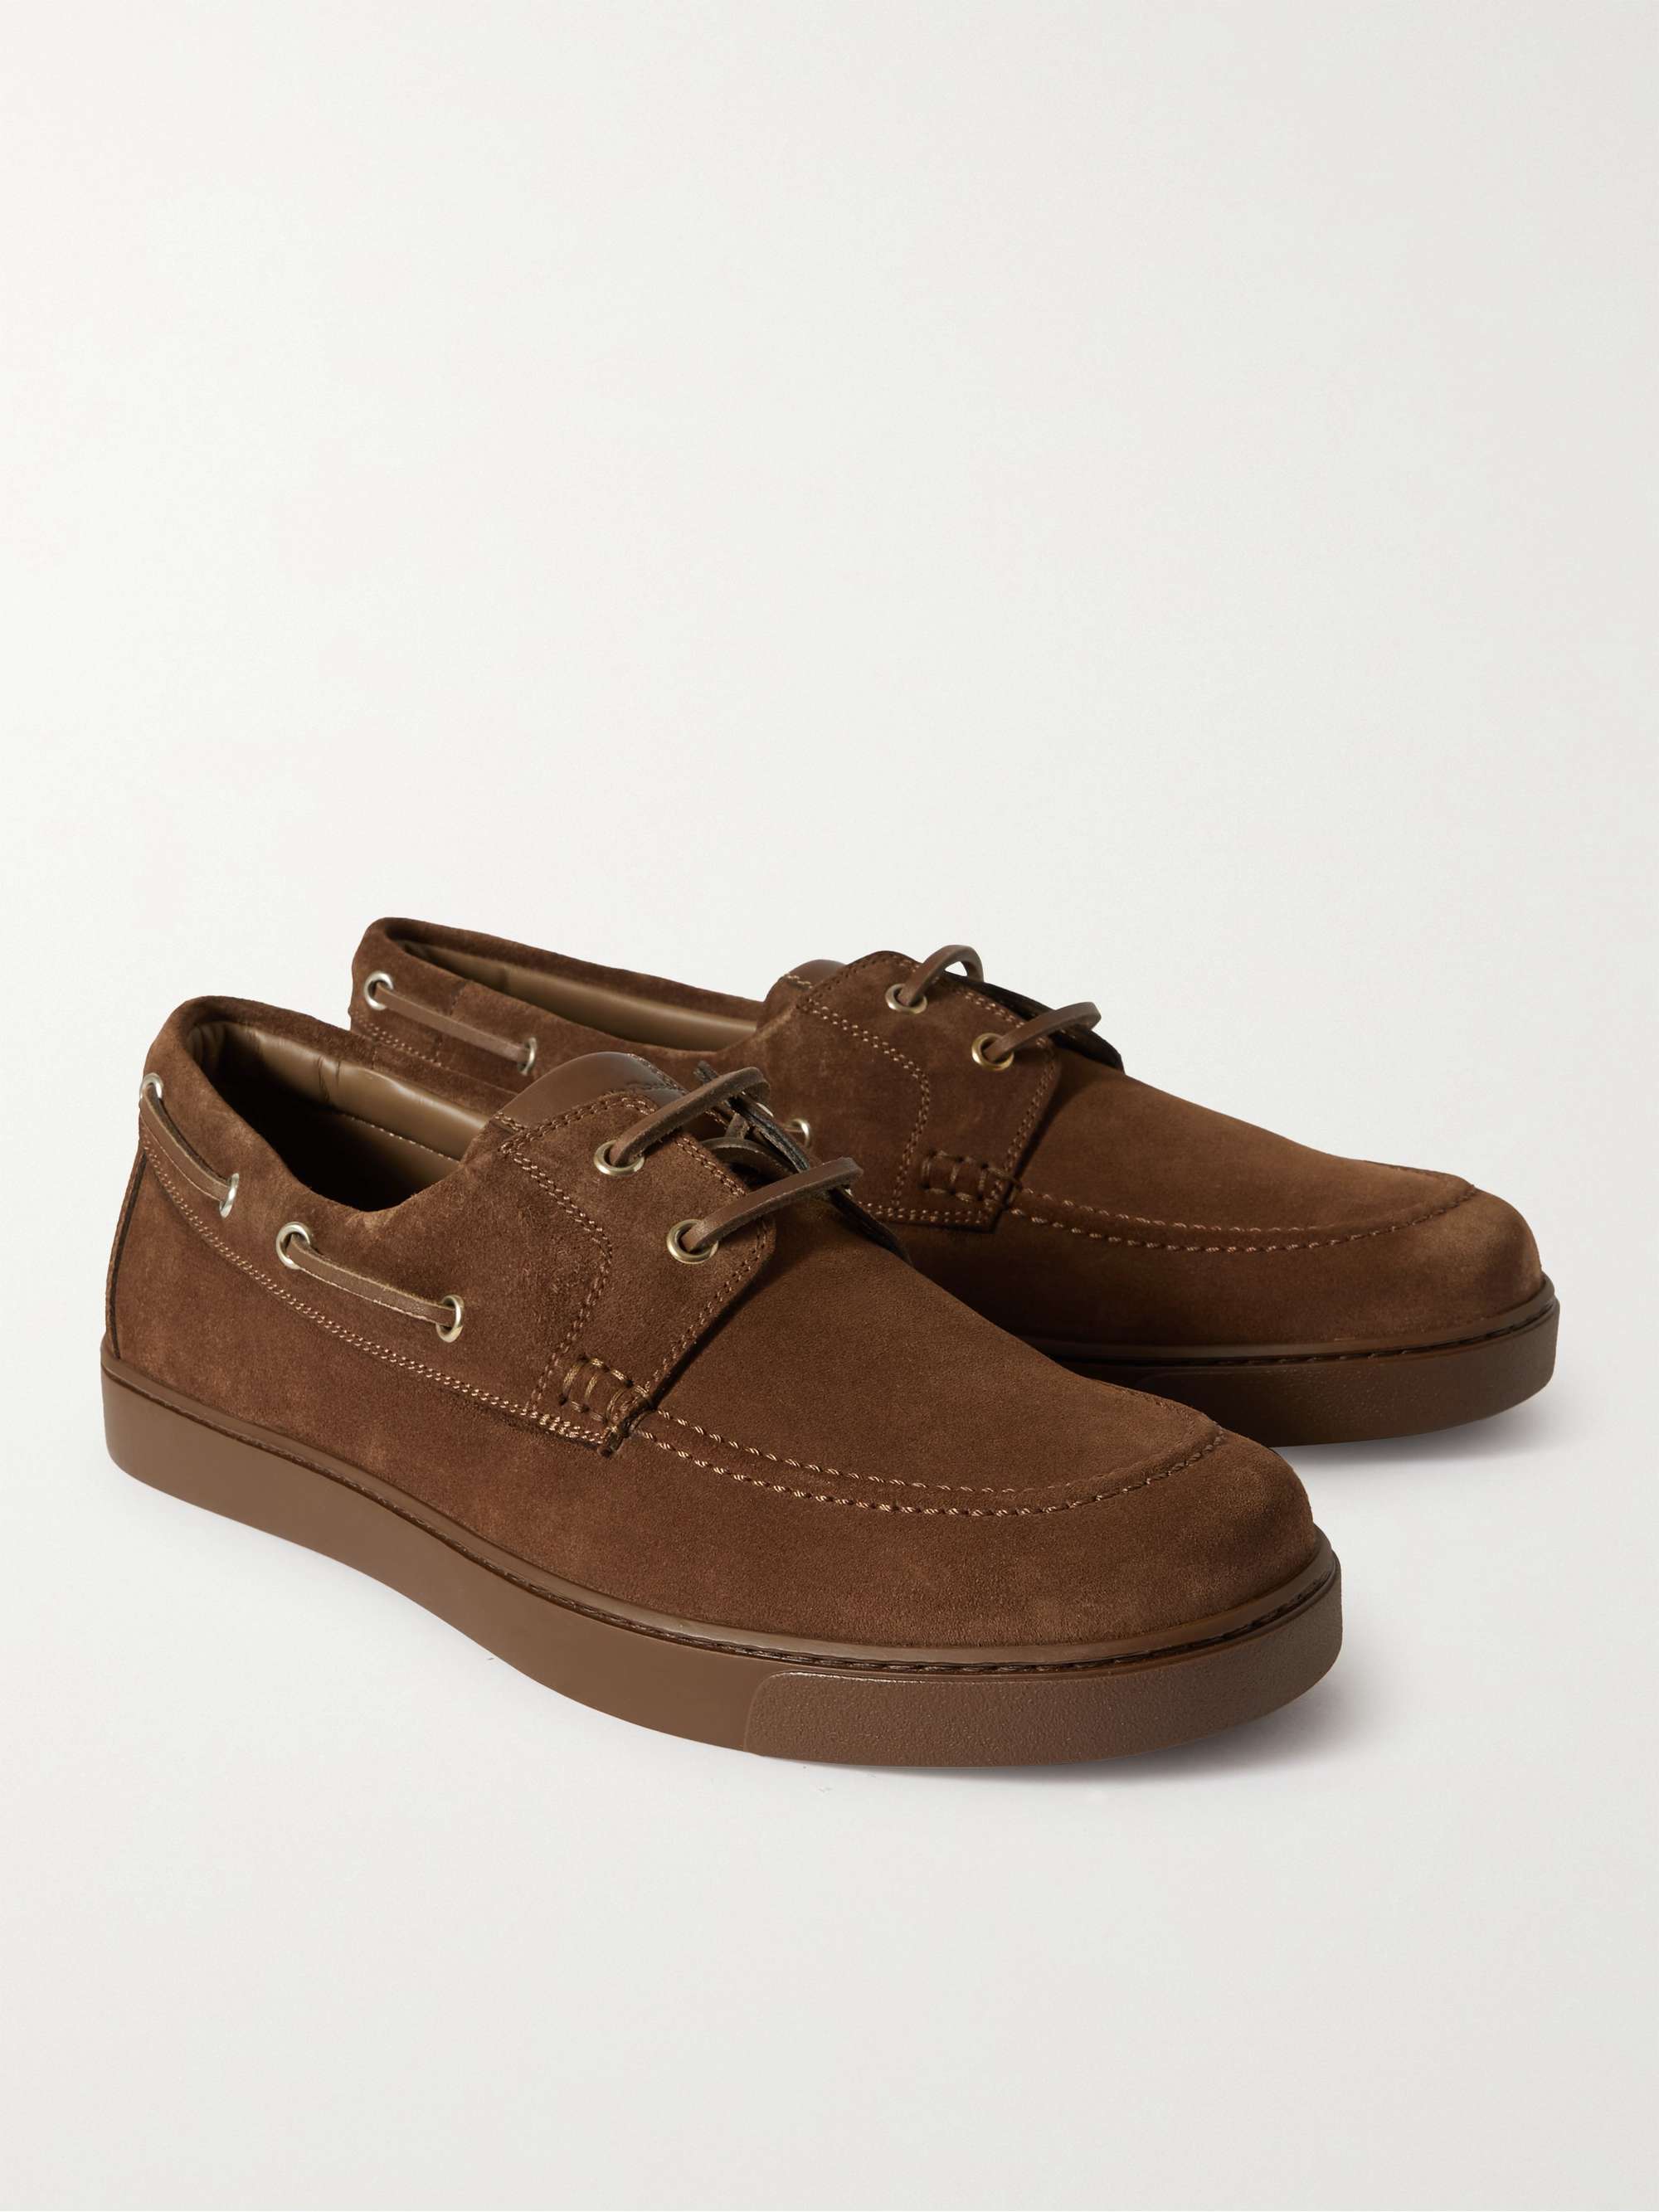 GIANVITO ROSSI Suede Boat Shoes